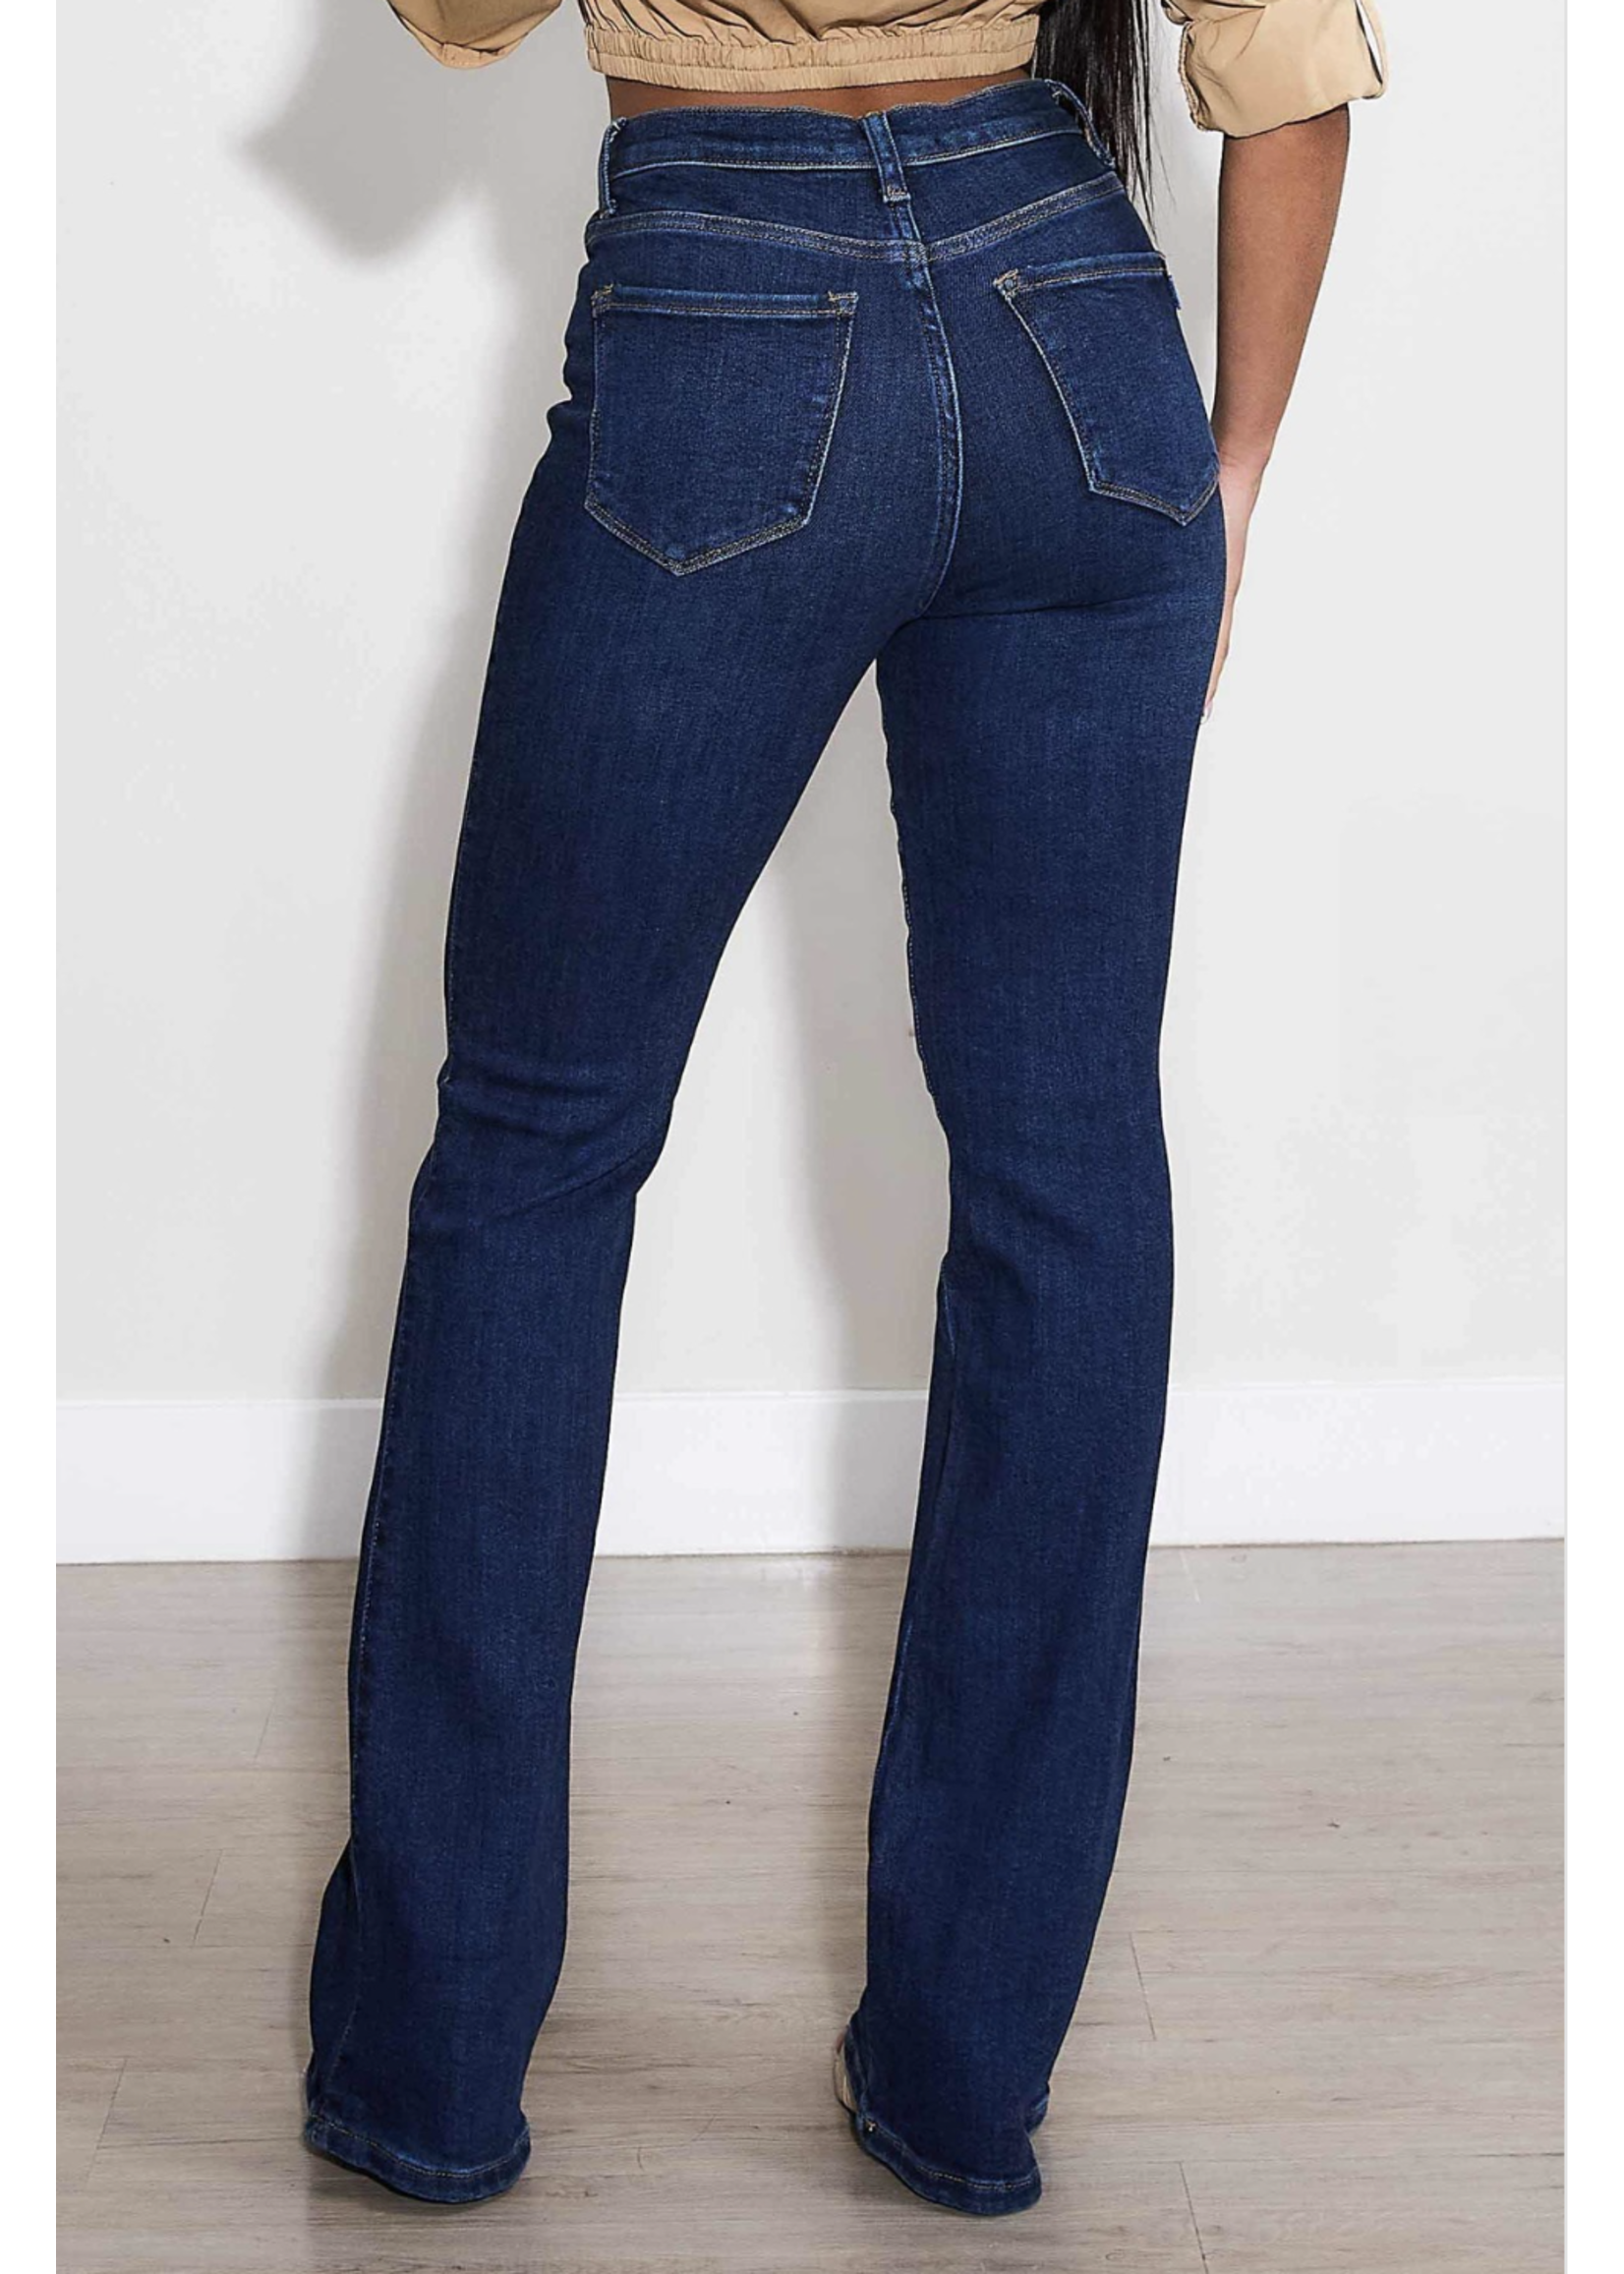 Our Favorite Boot Cut Jeans